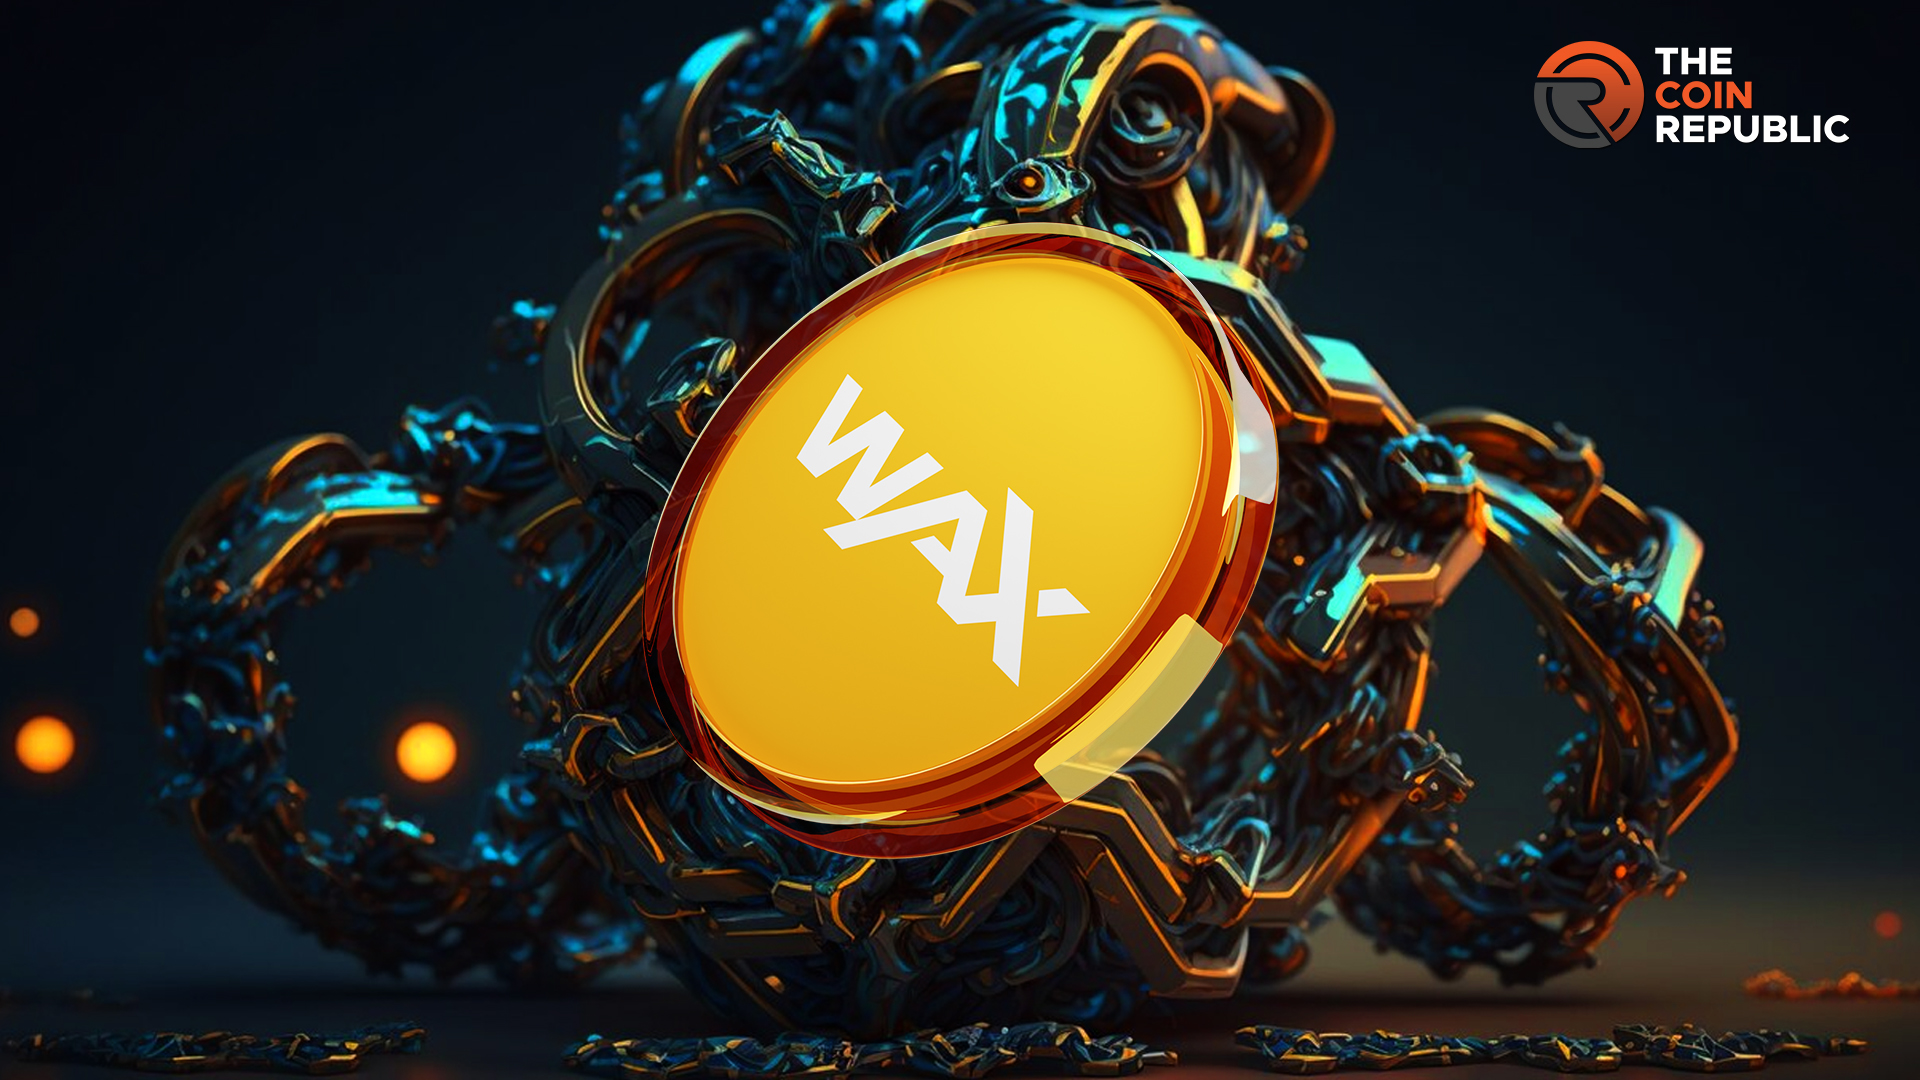 Wax Blockchain: Is WAXE Token the Next Big Thing in Crypto?